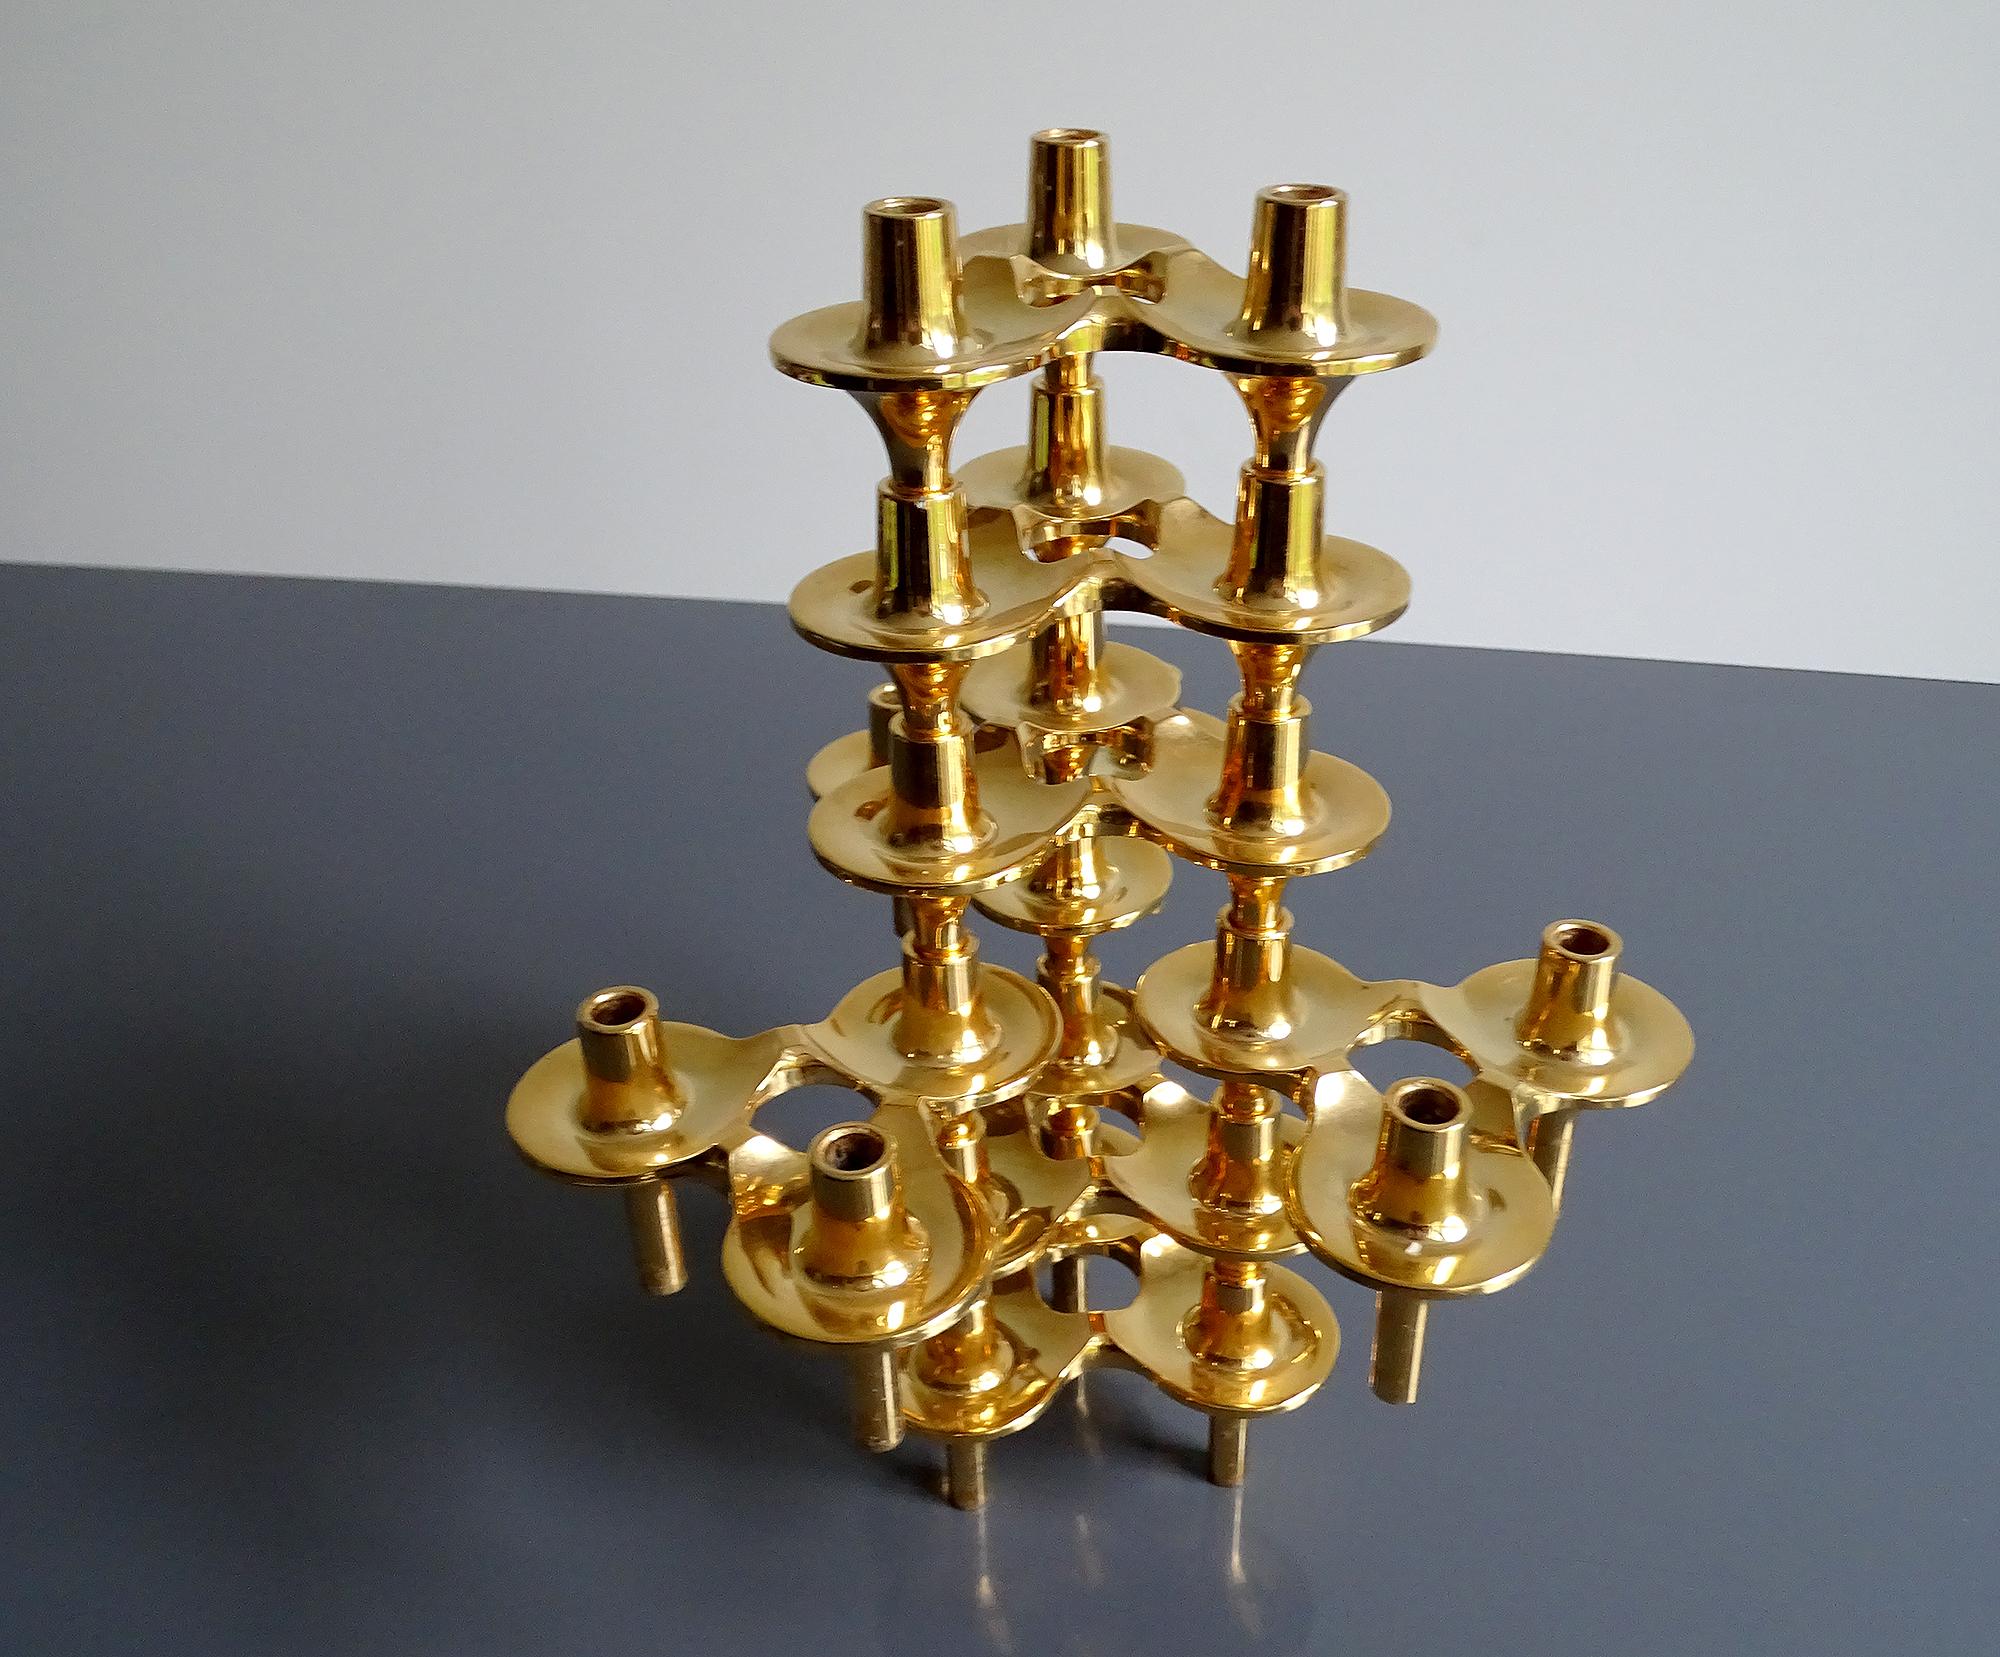 Set of 8 modular stackable candlesticks designed by Ceasar Stoffi and manufactured by BMF (Bavarian Metal Manufacturer) circa 1965-1970. The set was designed to allow for unlimited combinations or be used individually. The gilded versions are much